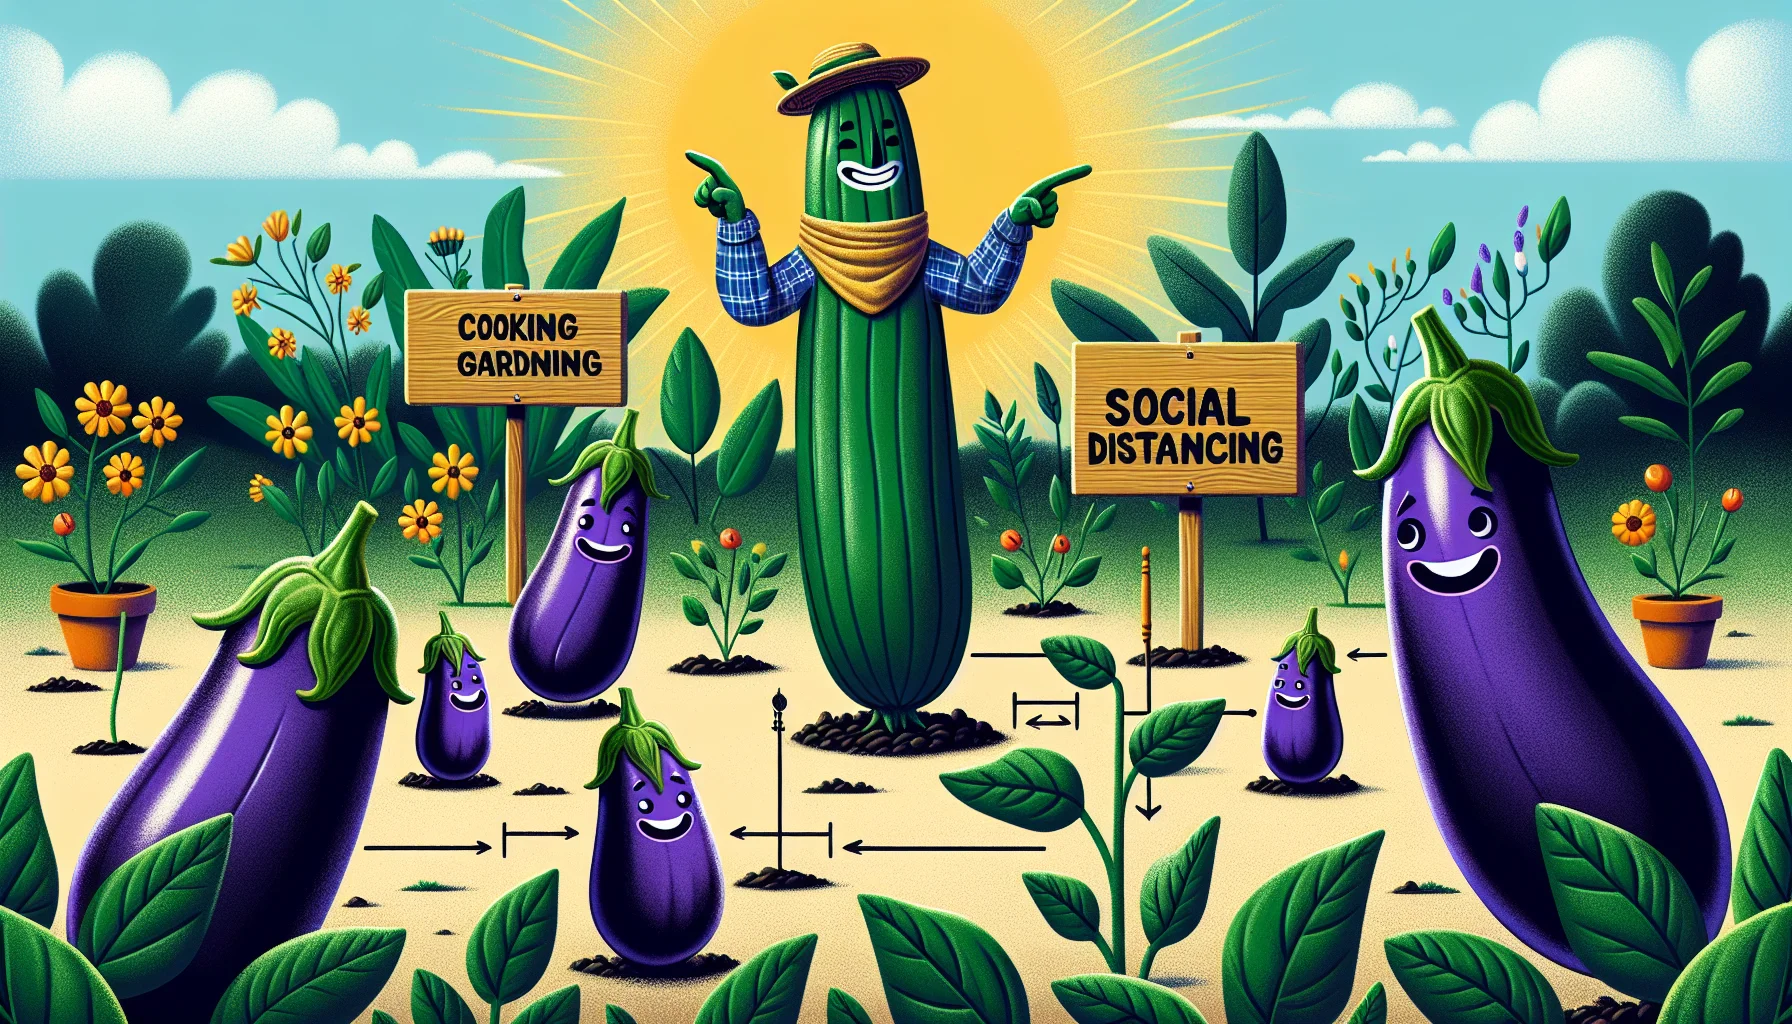 Create a humorously delightful illustration where eggplants have anthropomorphised facial expressions, and they are maintaining social distancing rules similar to humans! In this cooking-garden, a tall, green scarecrow with a playful smile directs the eggplants. Each eggplant varies in size, showcasing the need for different spacing in a real vegetable garden. The garden background is filled with diverse plants appealing to the eyes, nudging people to enjoy the fun of gardening. Remember to make it feel realistic - with sun rays scattering across leaves and soil texture visible to make it compelling.